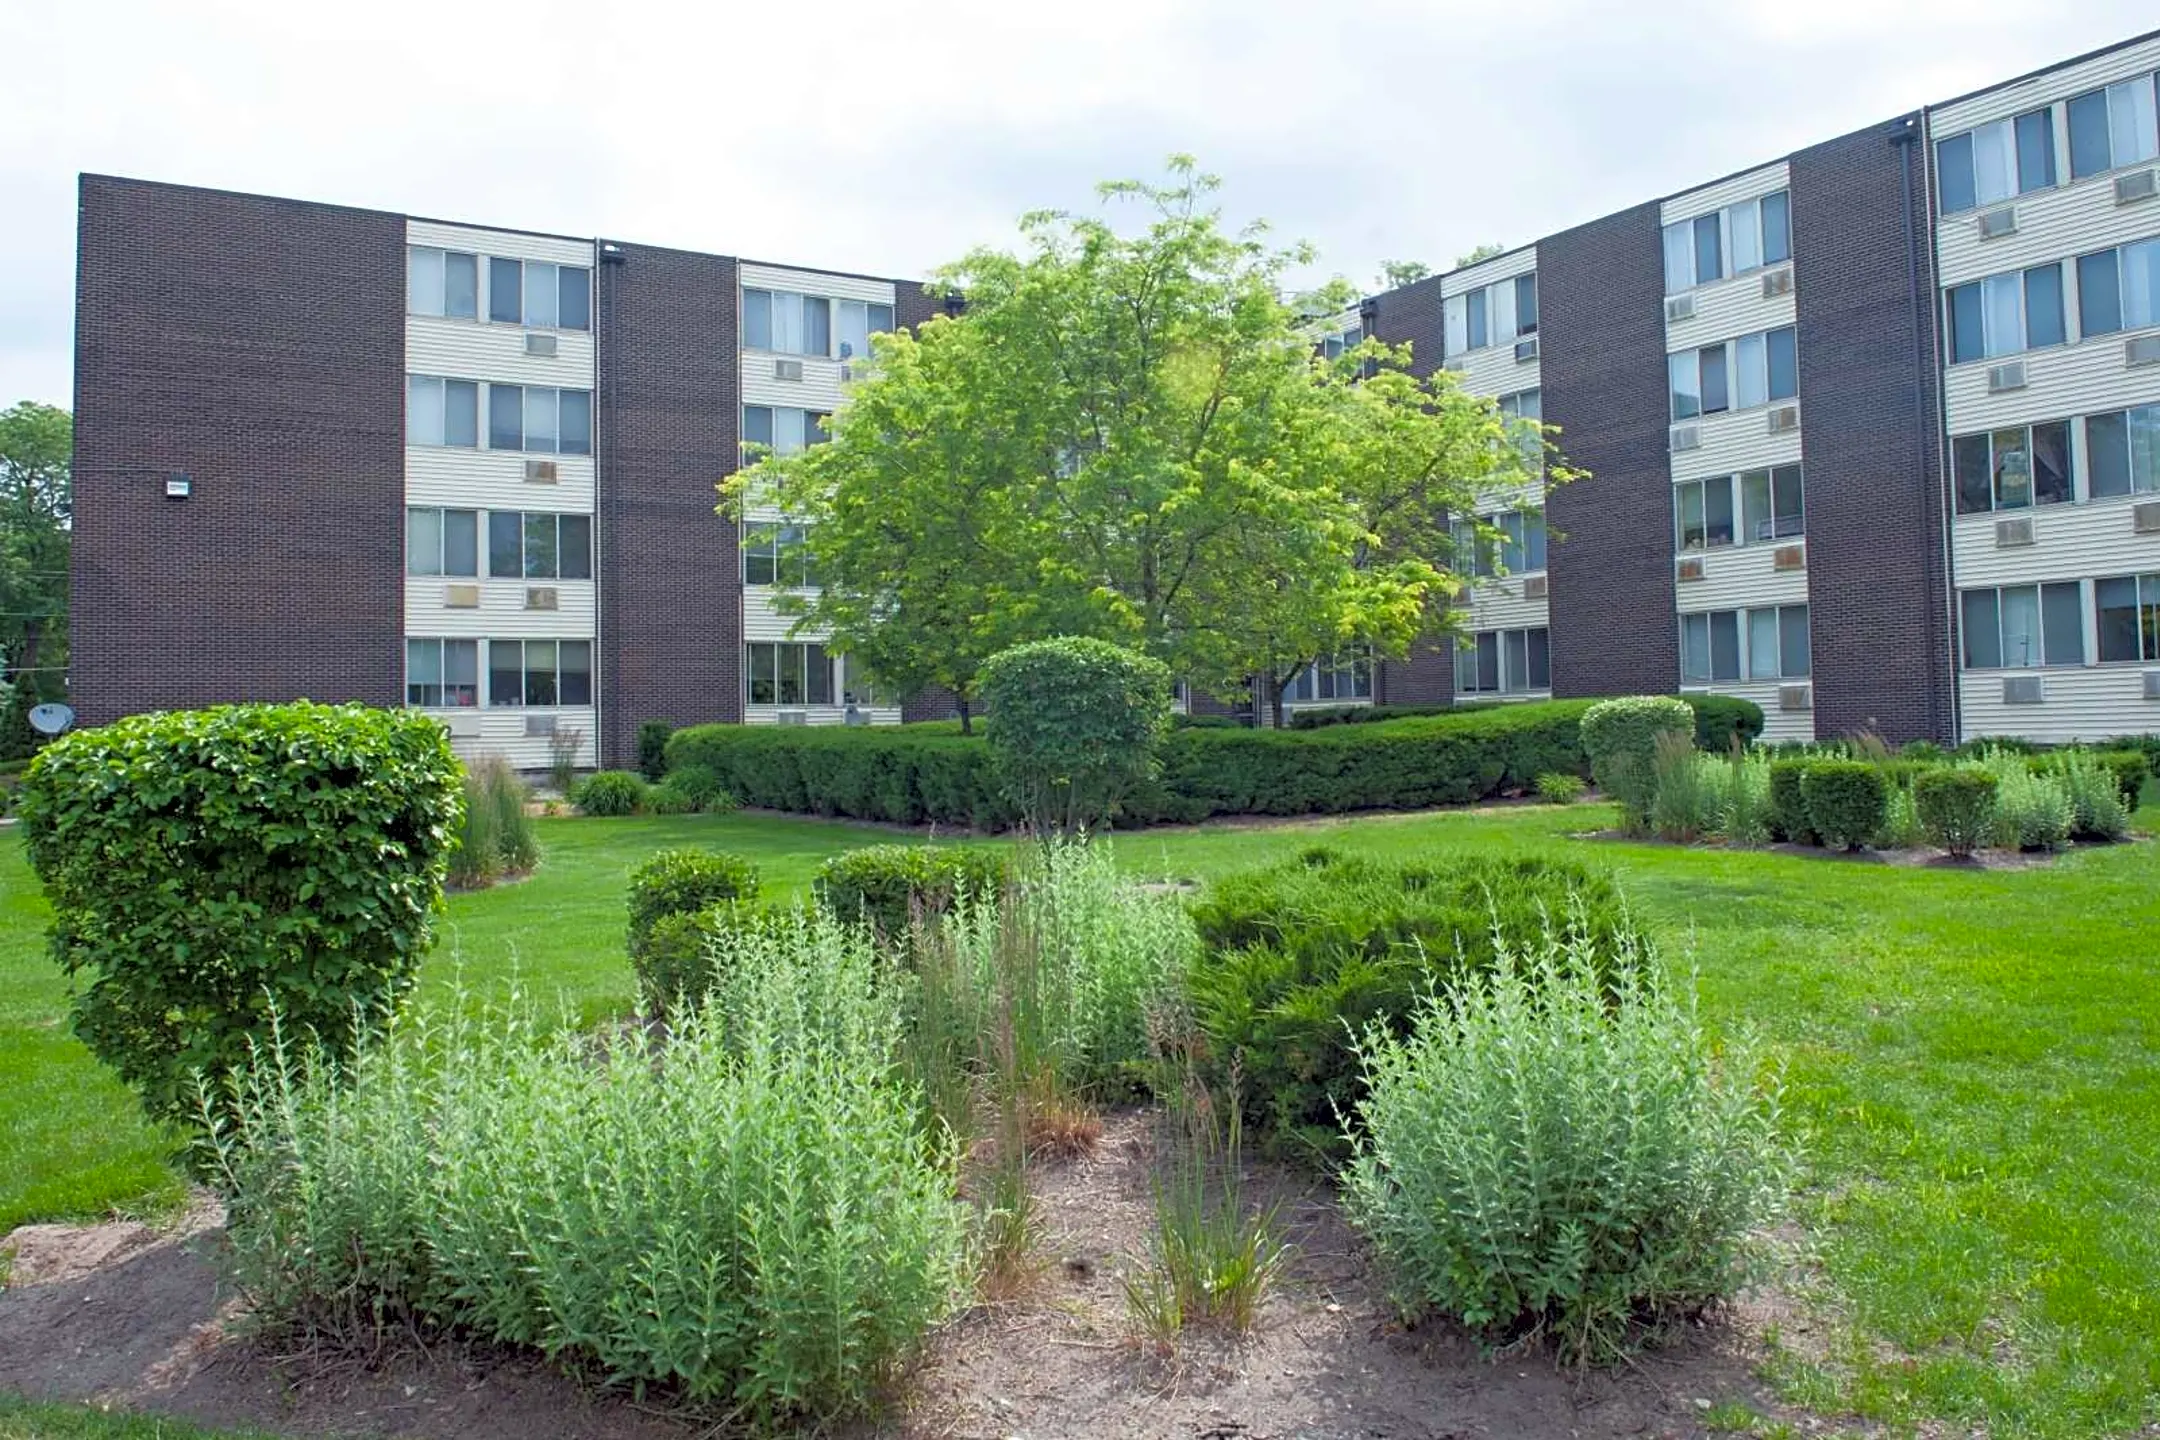 Landscaping - Marquette Apartments - Gary, IN